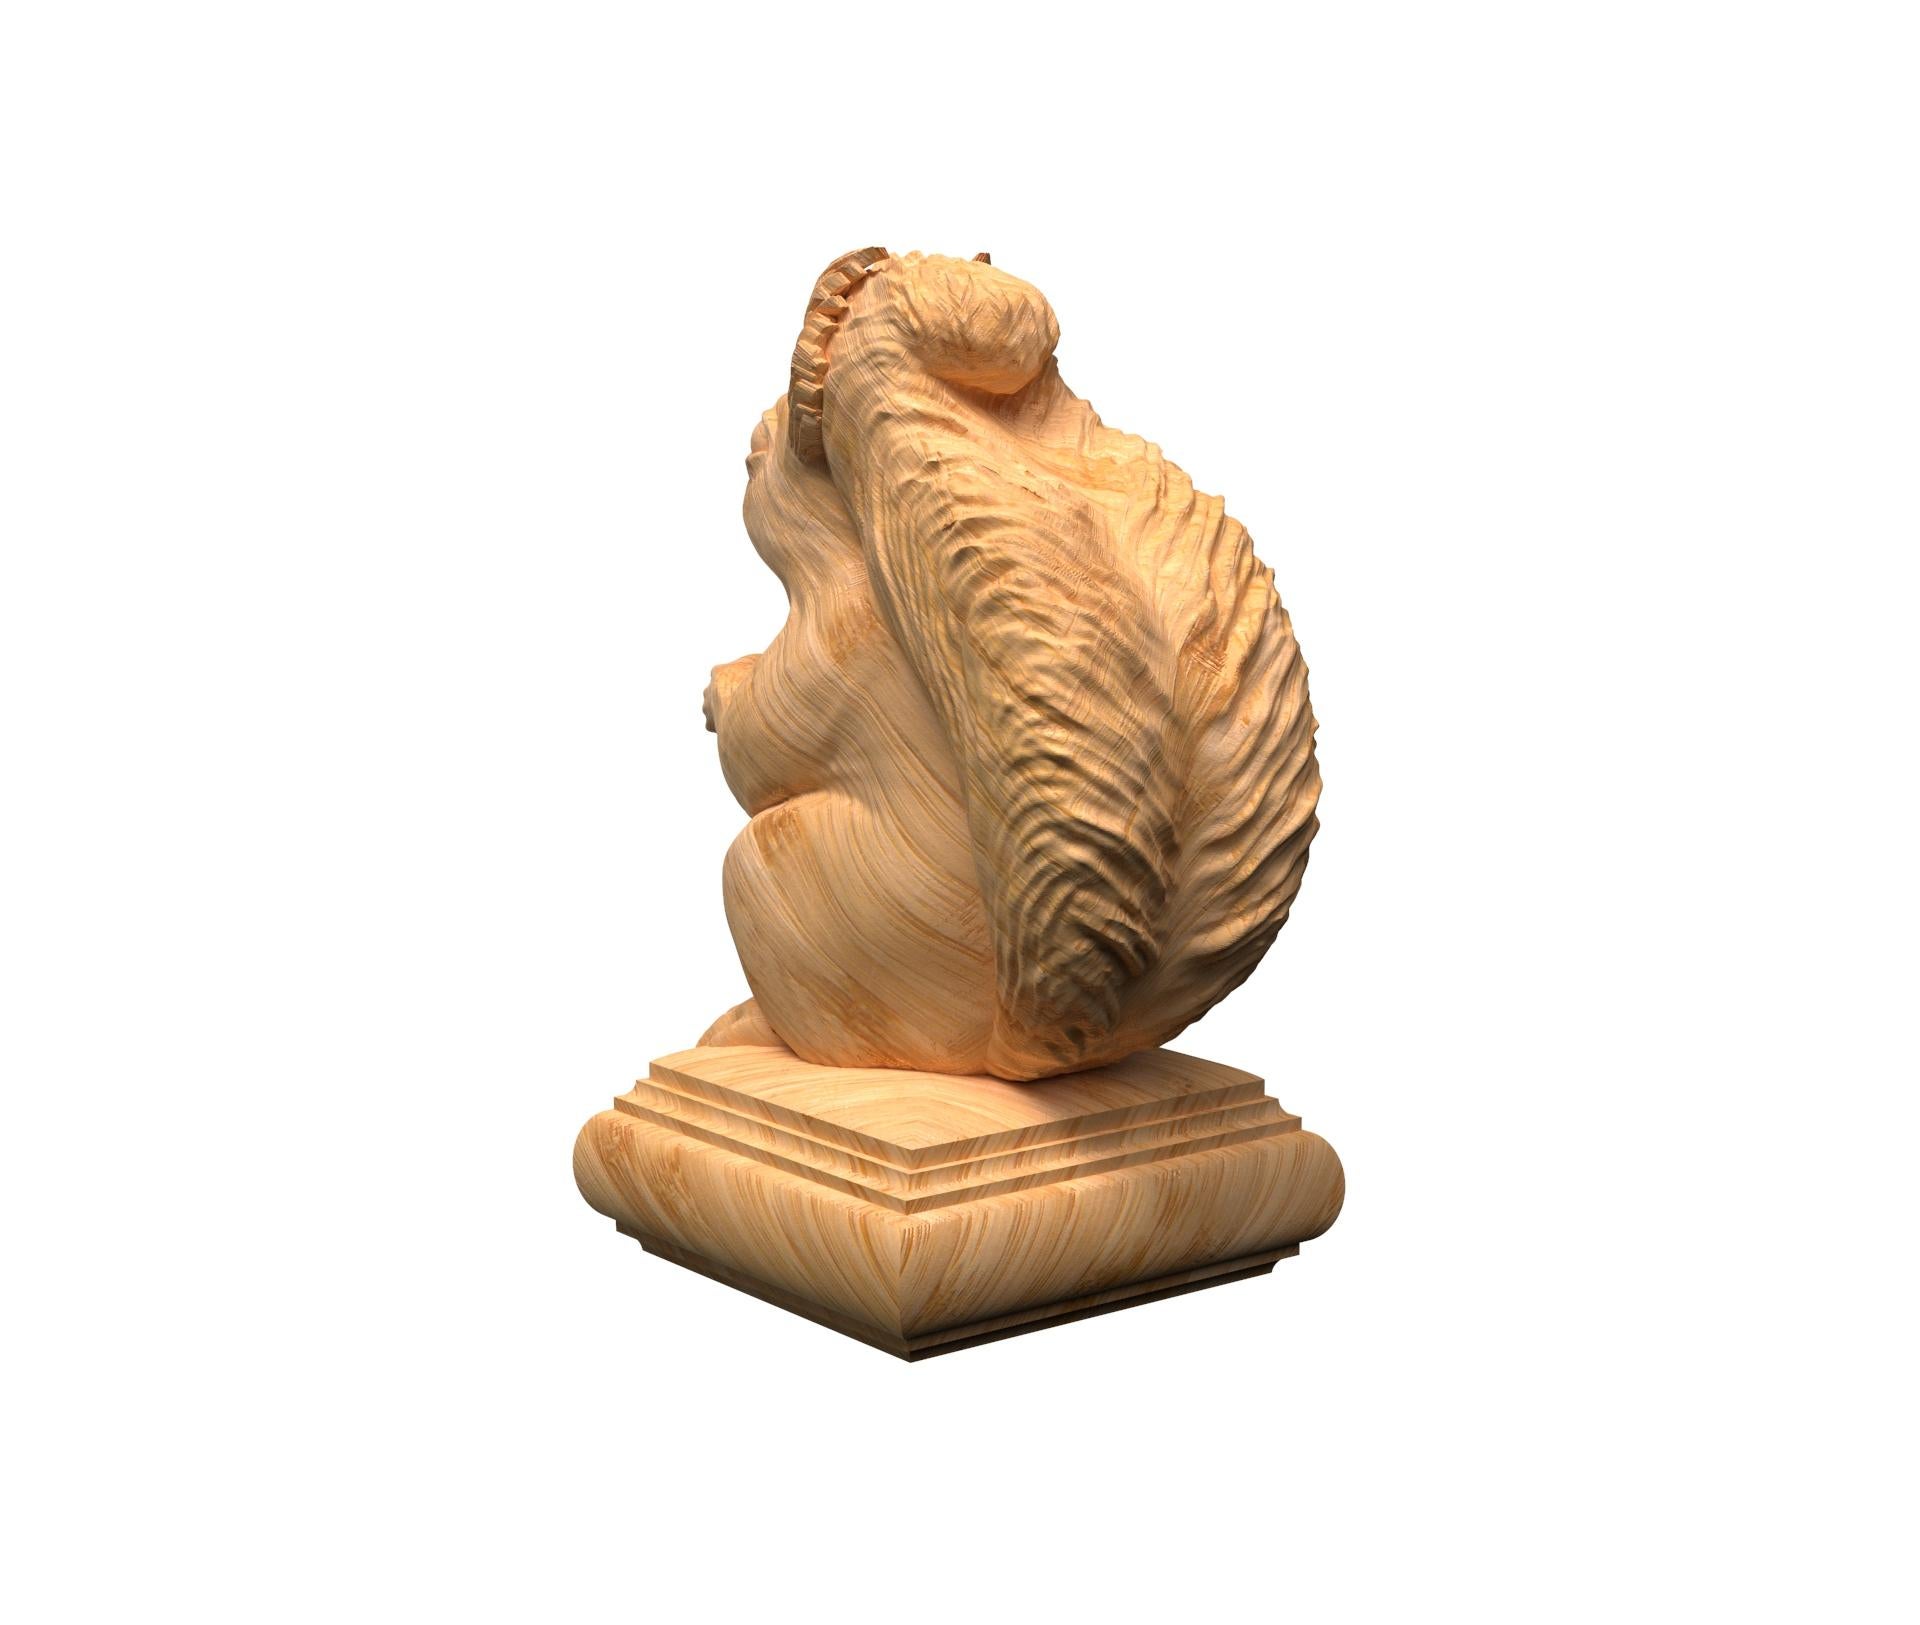 European Wooden Carved Squirrel Finial. Handcrafted Stairs Decoration, Oak Newel Post Cap For Sale